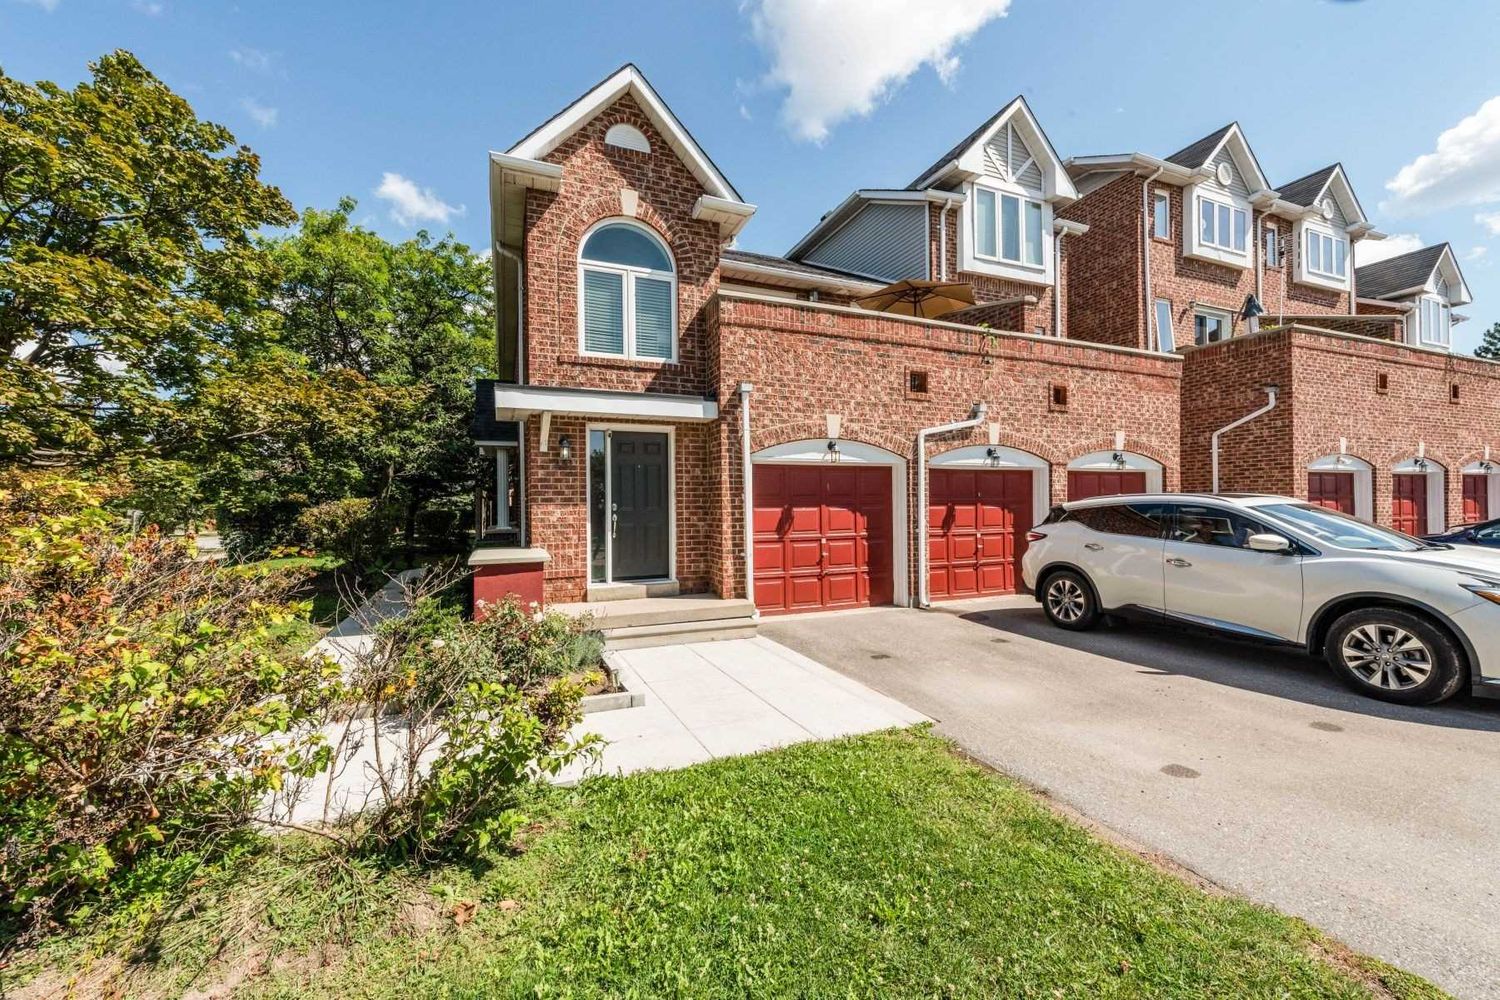 45-85 Bristol Road E. Sandalwood Townhomes is located in  Mississauga, Toronto - image #1 of 2